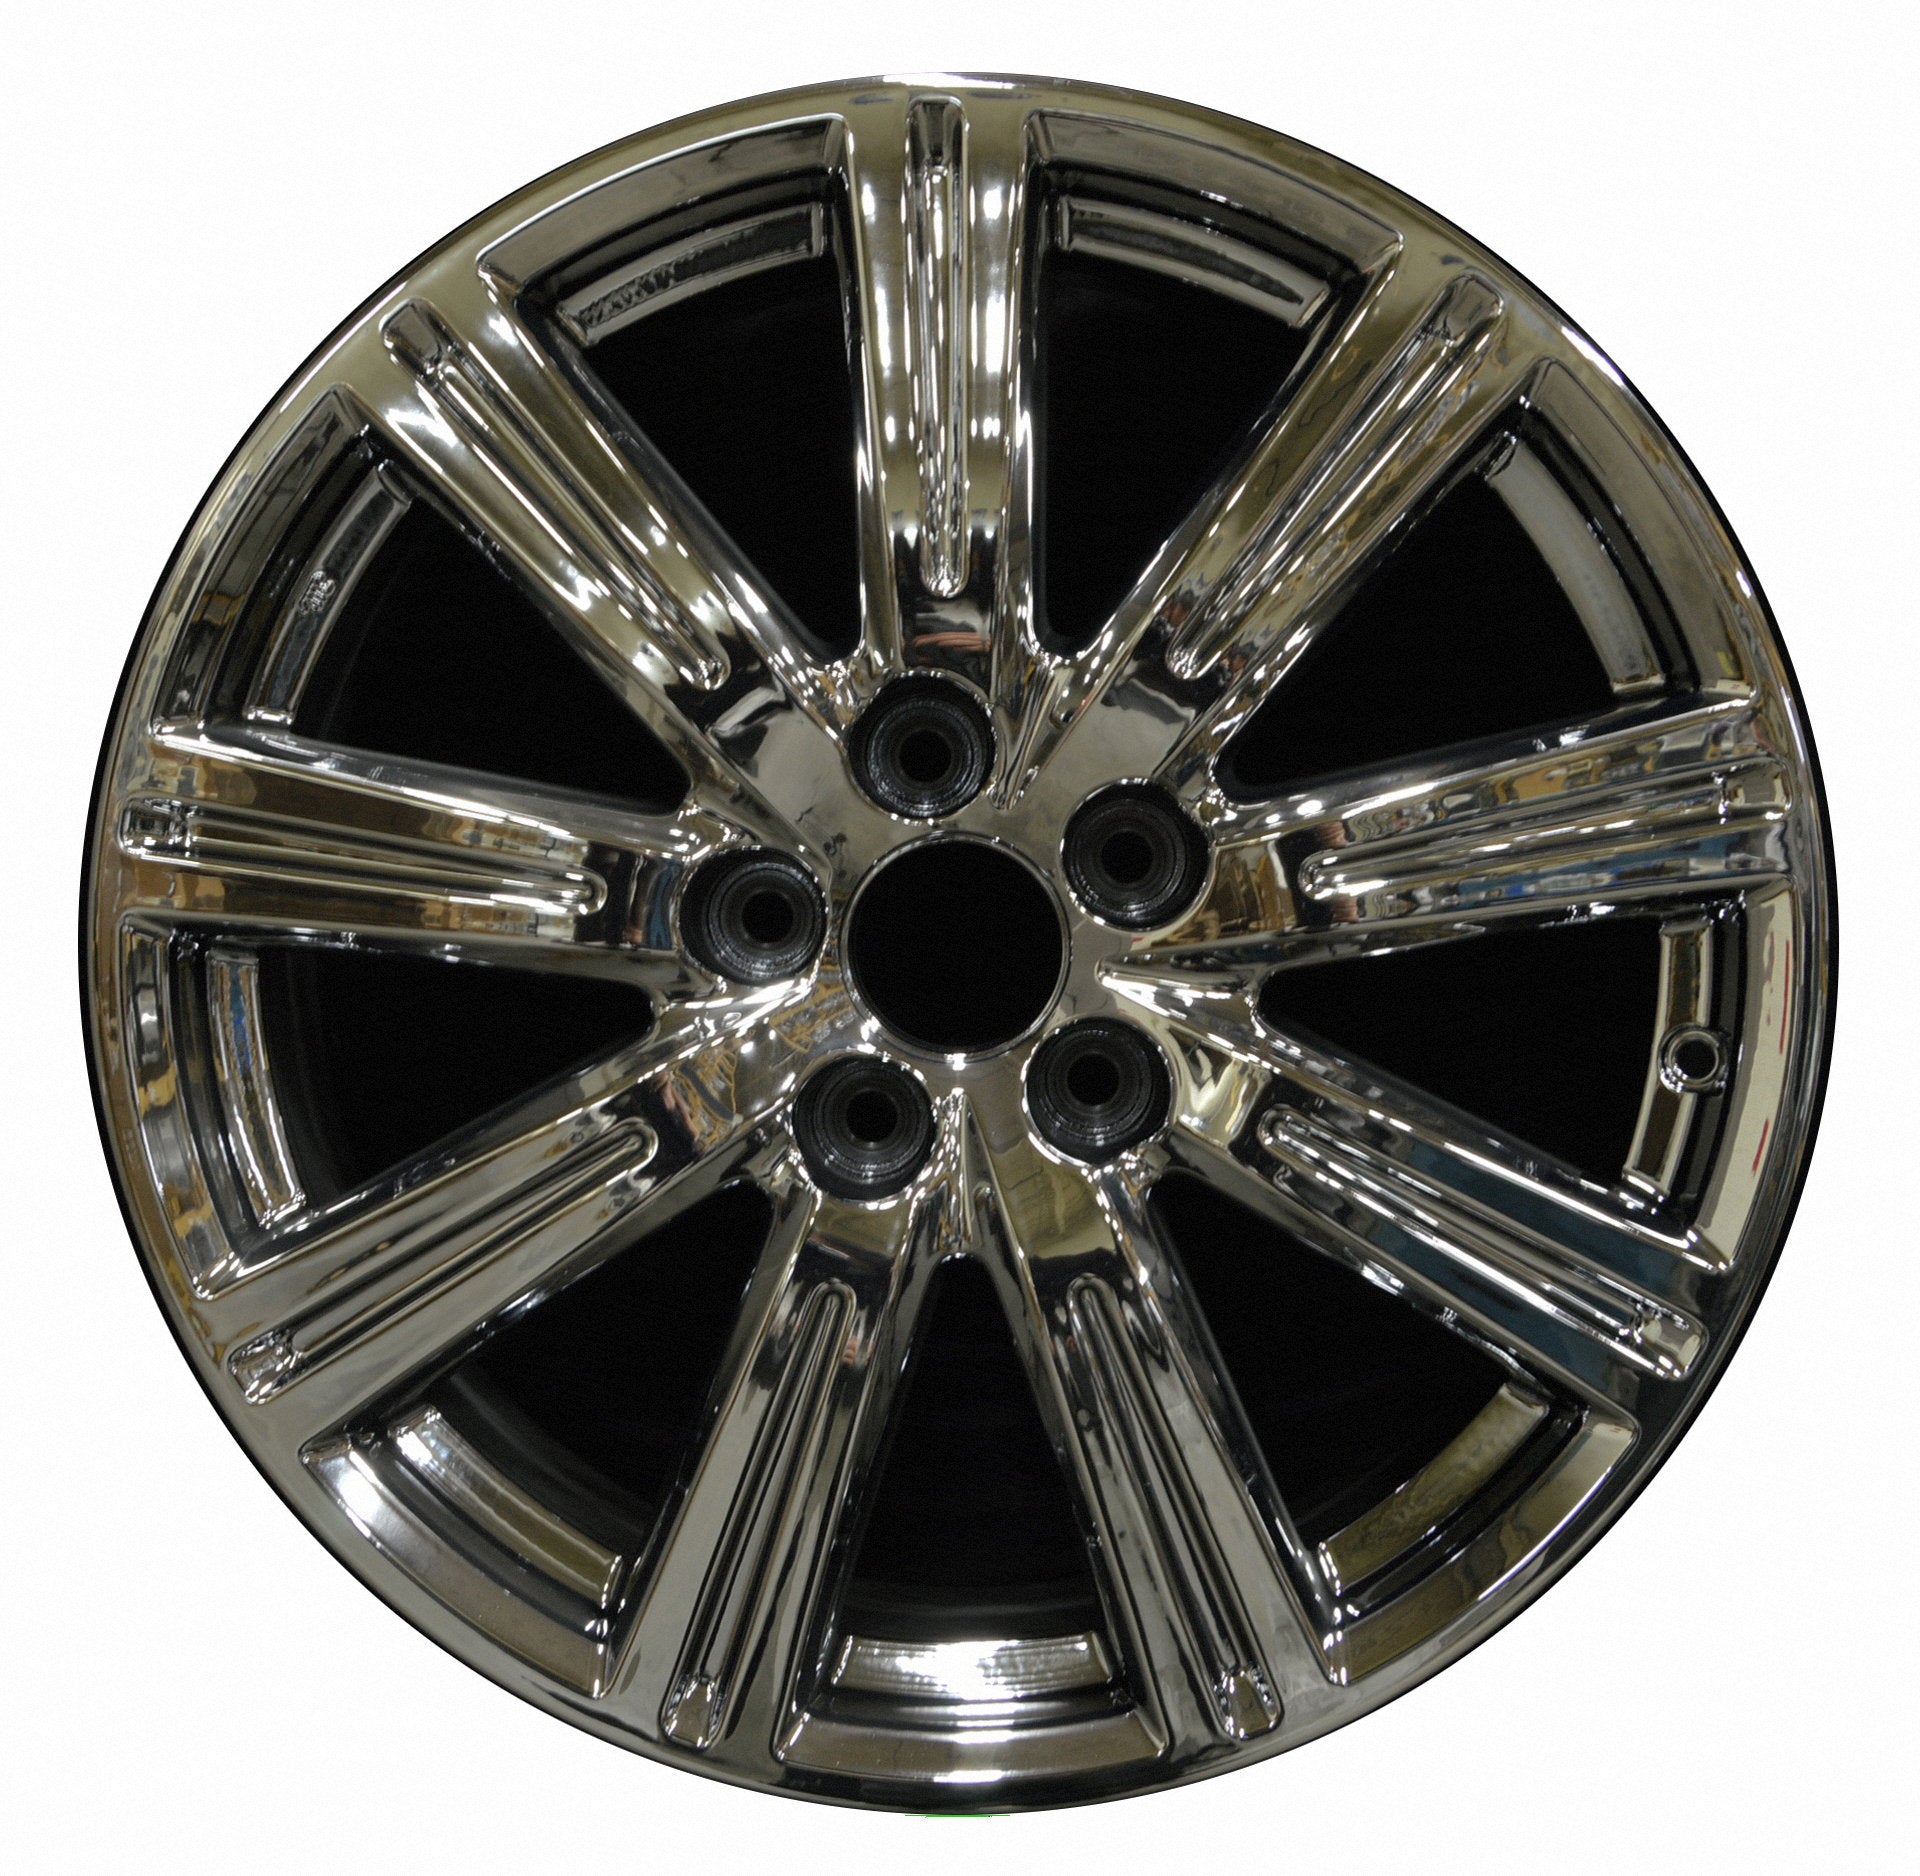 Acura TL  2010, 2011, 2012, 2013, 2014 Factory OEM Car Wheel Size 19x8 Alloy WAO.71789.PVD1.FF